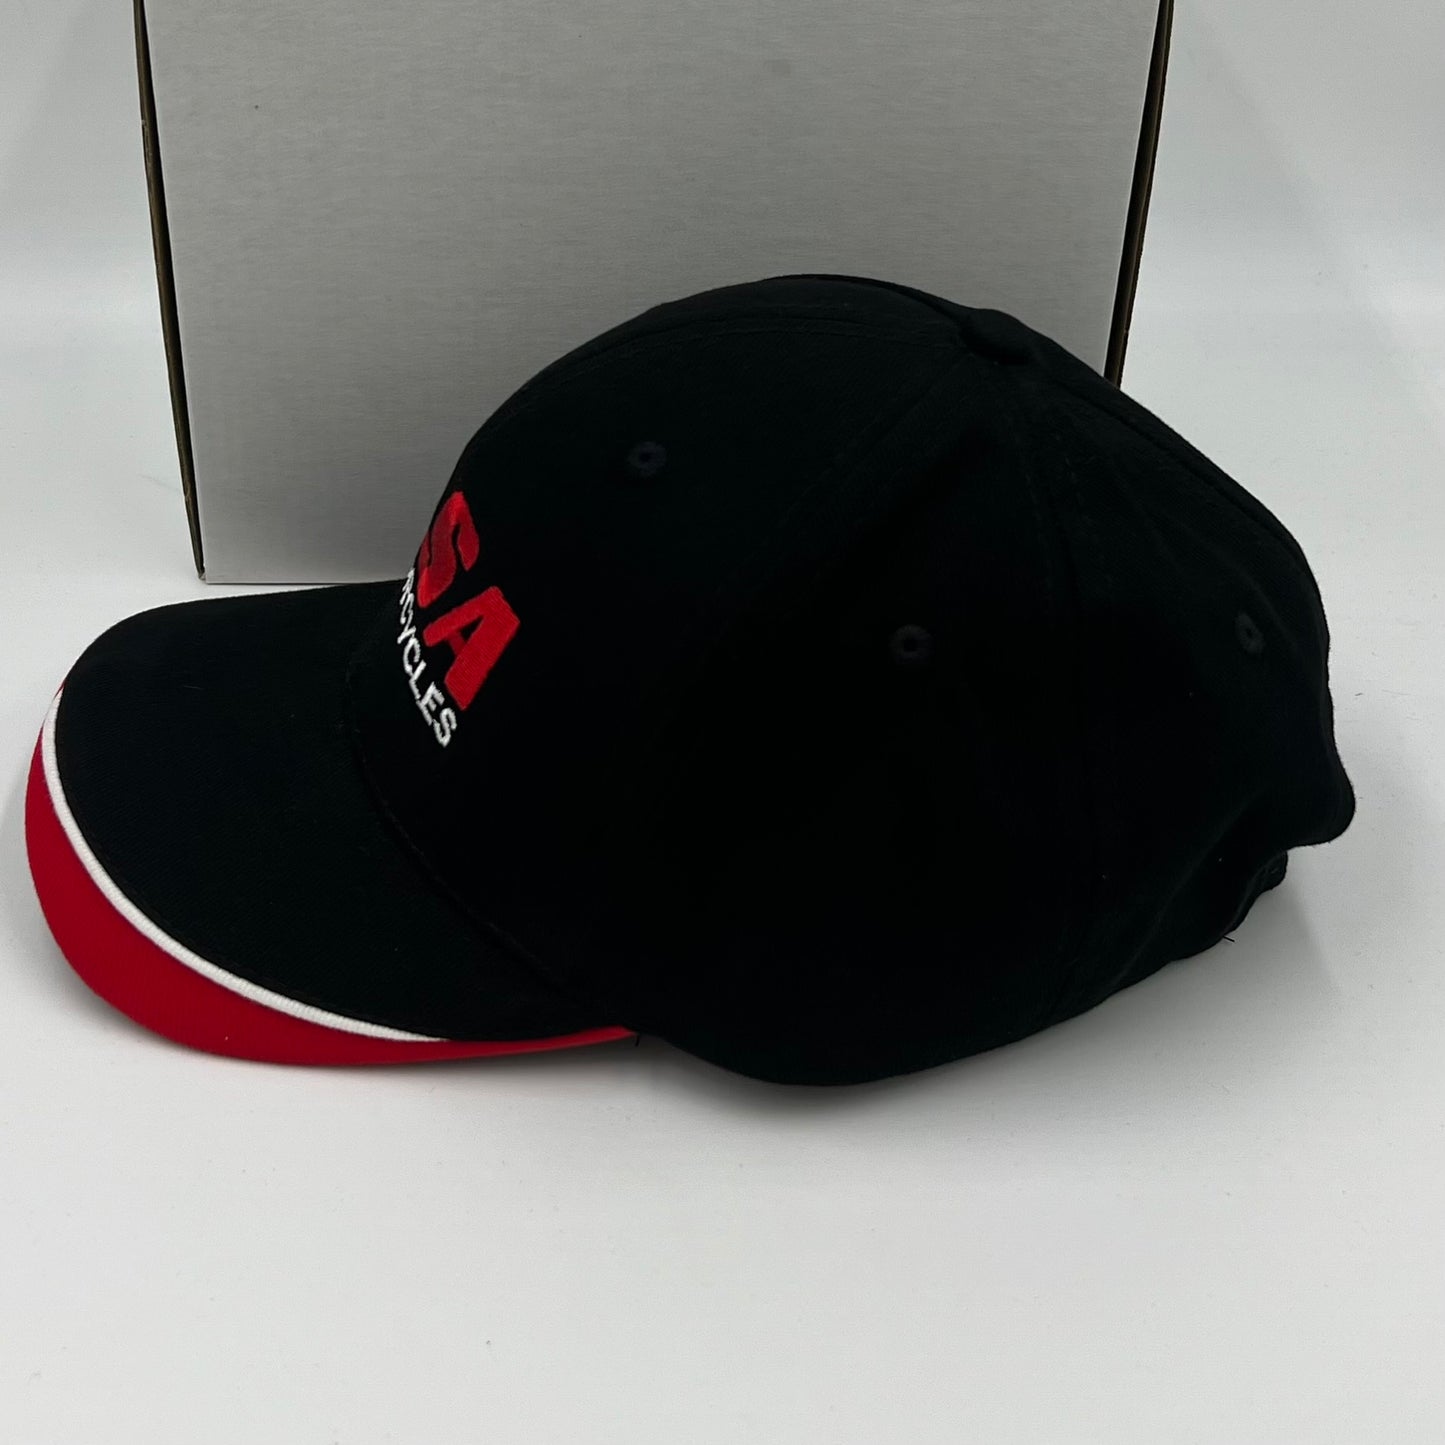 BSA Motorcycle Embroidered Hat